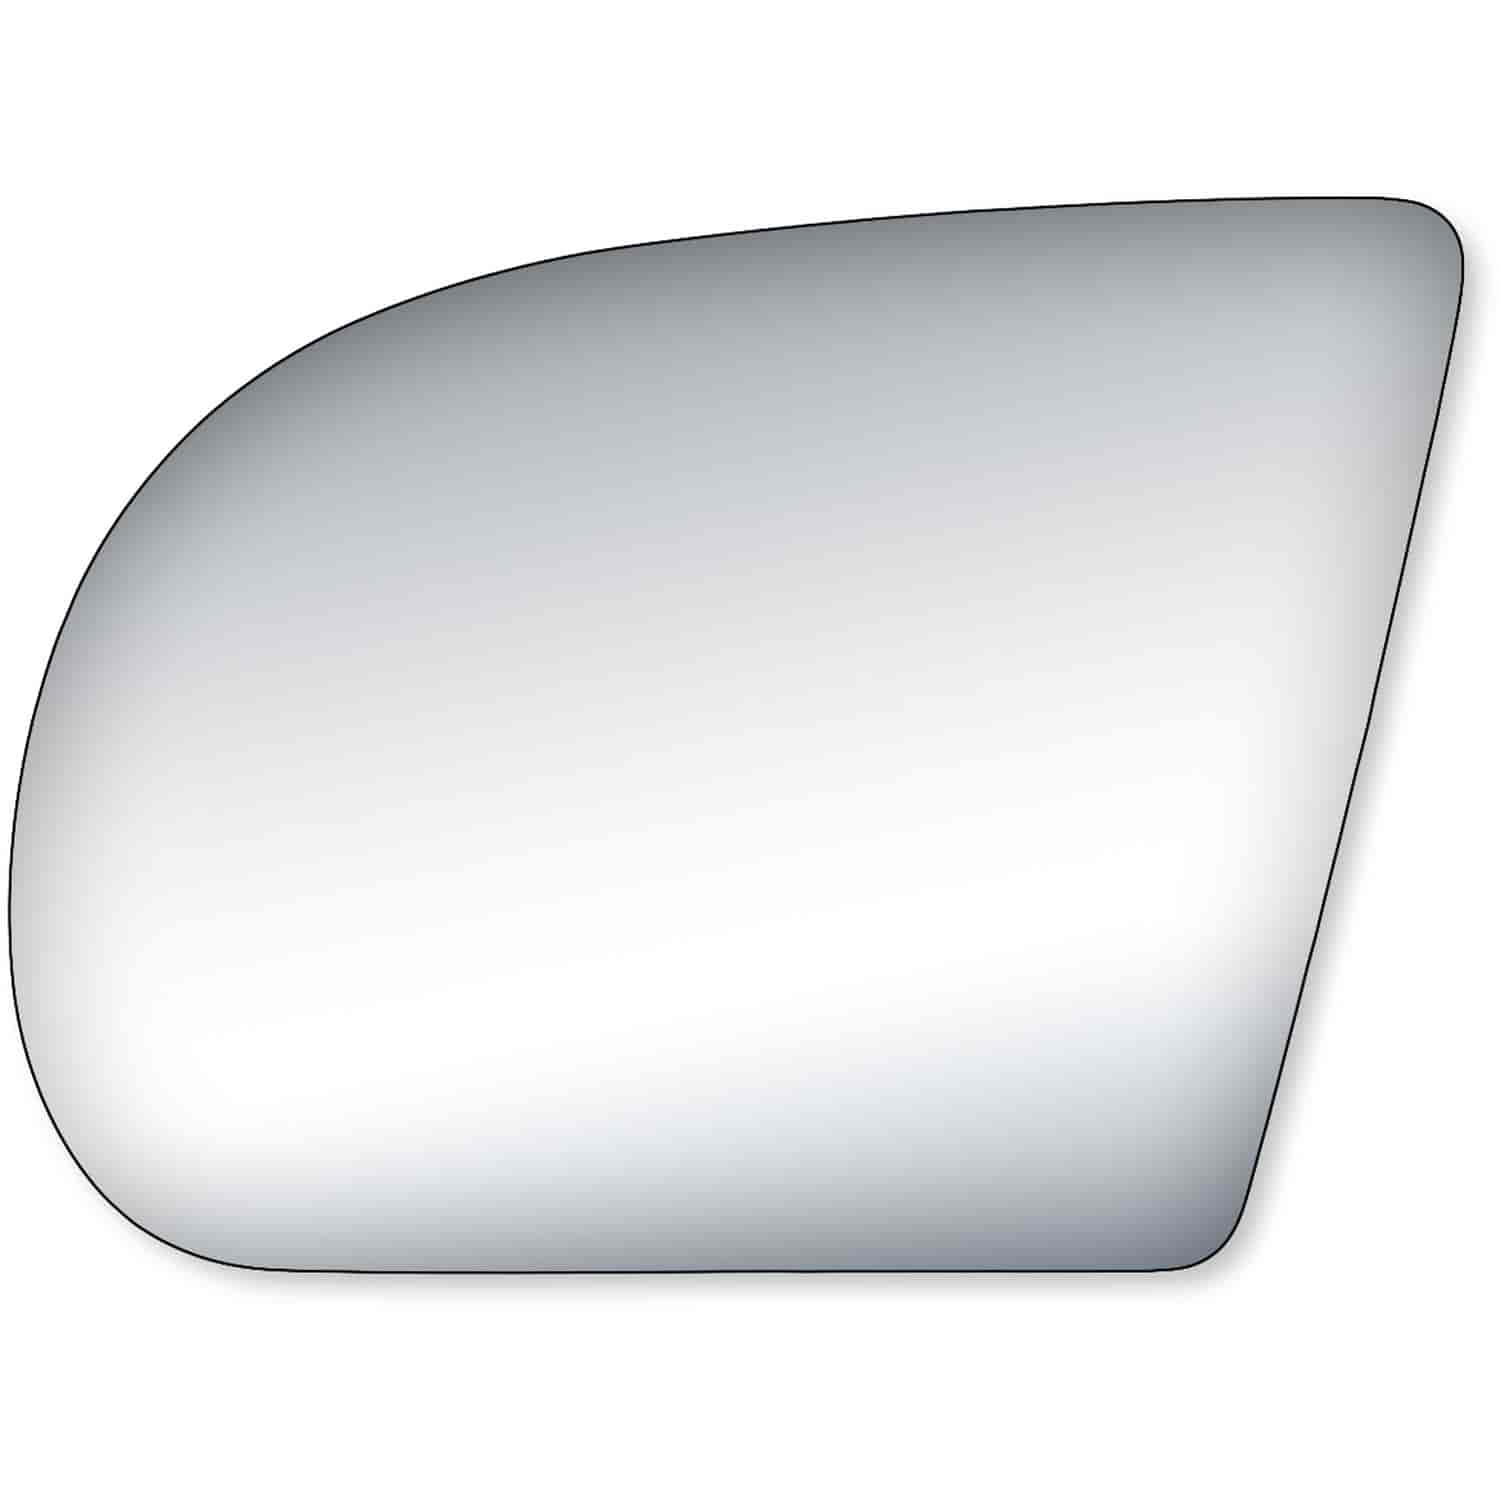 Replacement Glass for 99-05 Blazer Mid Size ; 98-03 S10 Pick-Up; 99-03 Envoy Mid Size ; 99-03 Jimmy